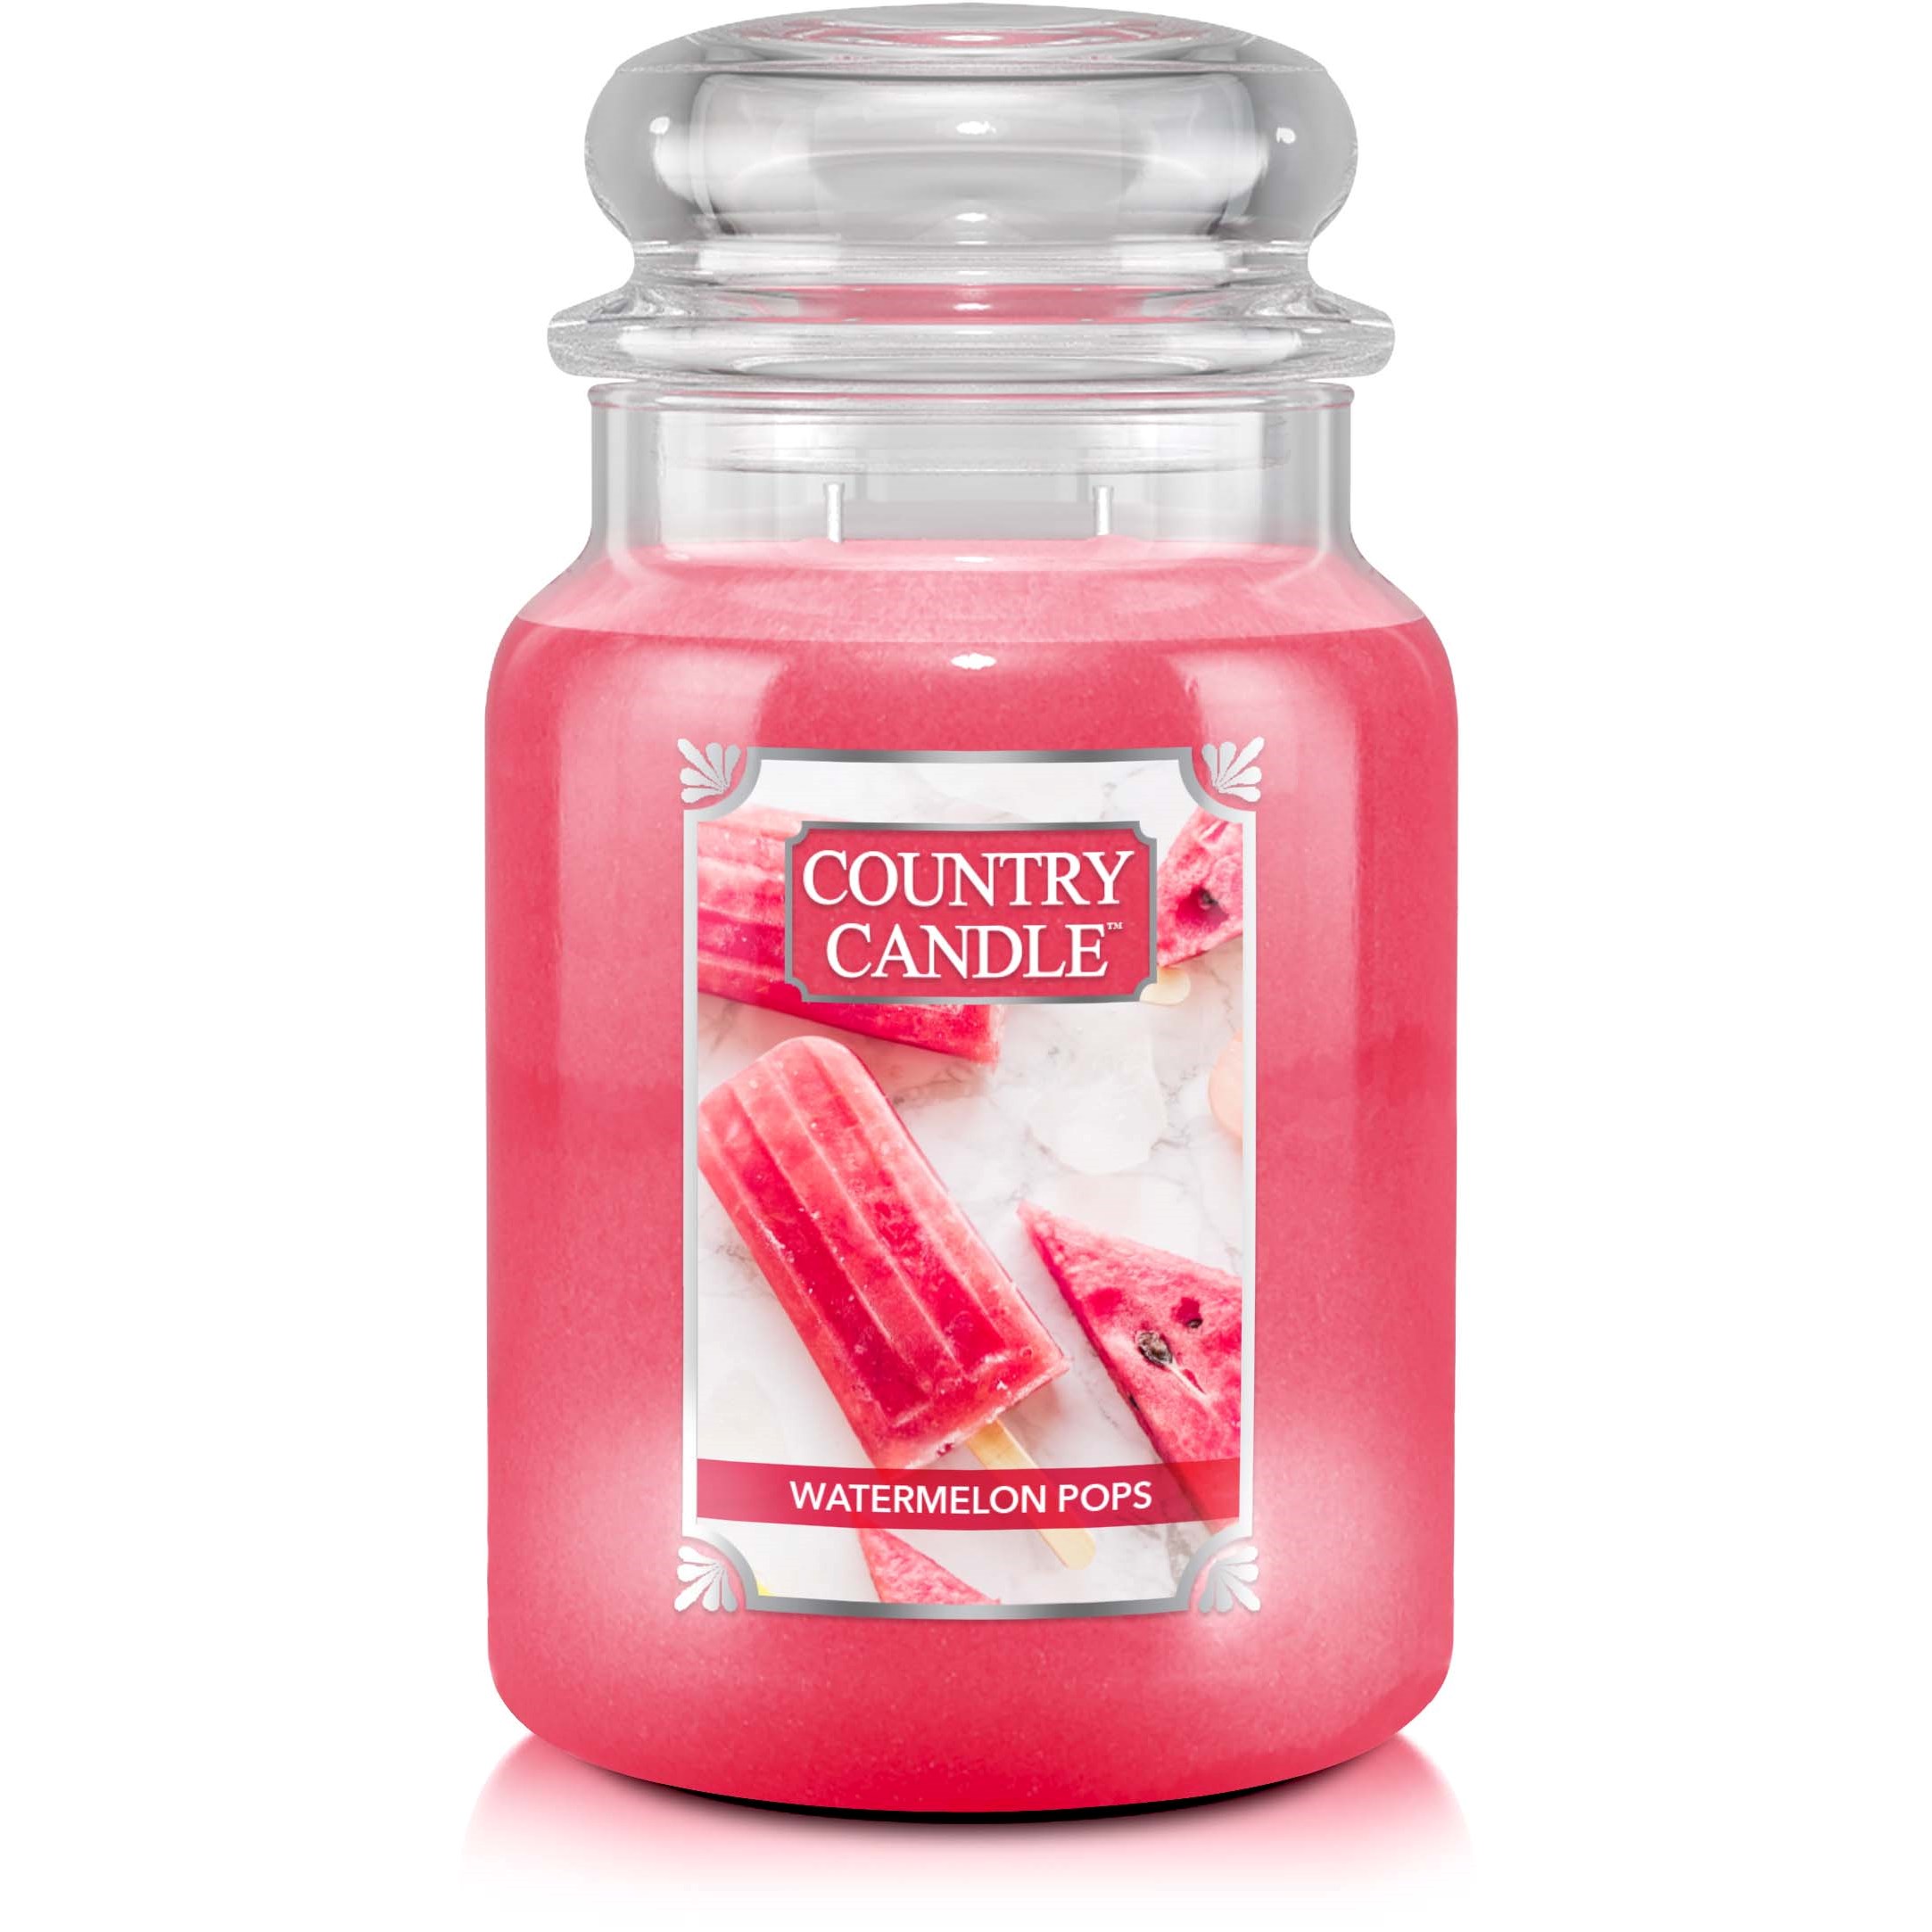 Country Candle Large Jar Watermelon Pops 680 g